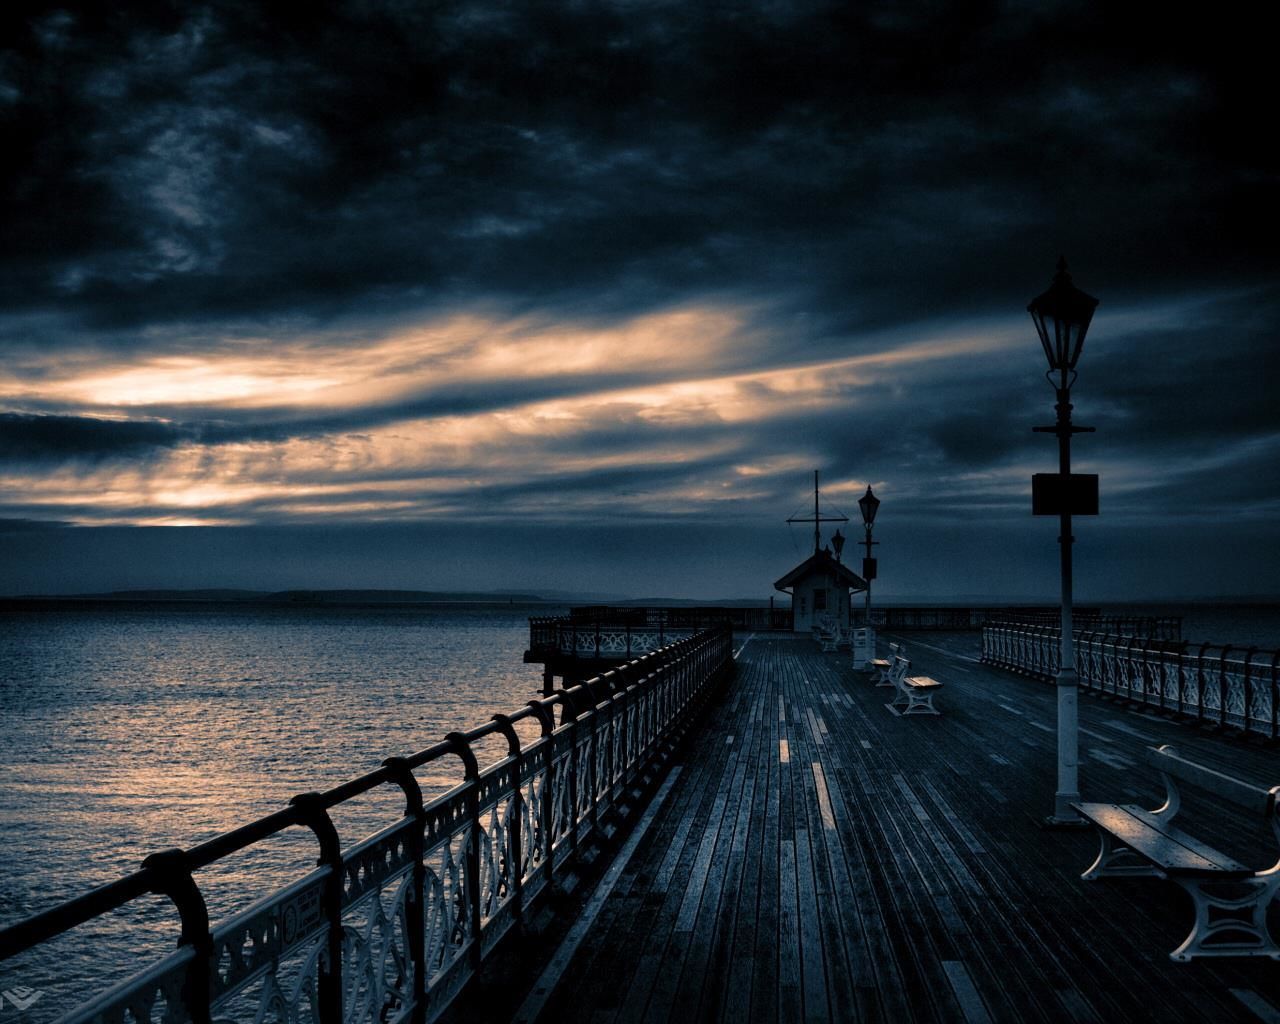 water, sea, sky, cloud - sky, pier, railing, horizon over water, cloudy, the way forward, sunset, scenics, nature, cloud, dusk, tranquility, diminishing perspective, weather, silhouette, beauty in nature, tranquil scene